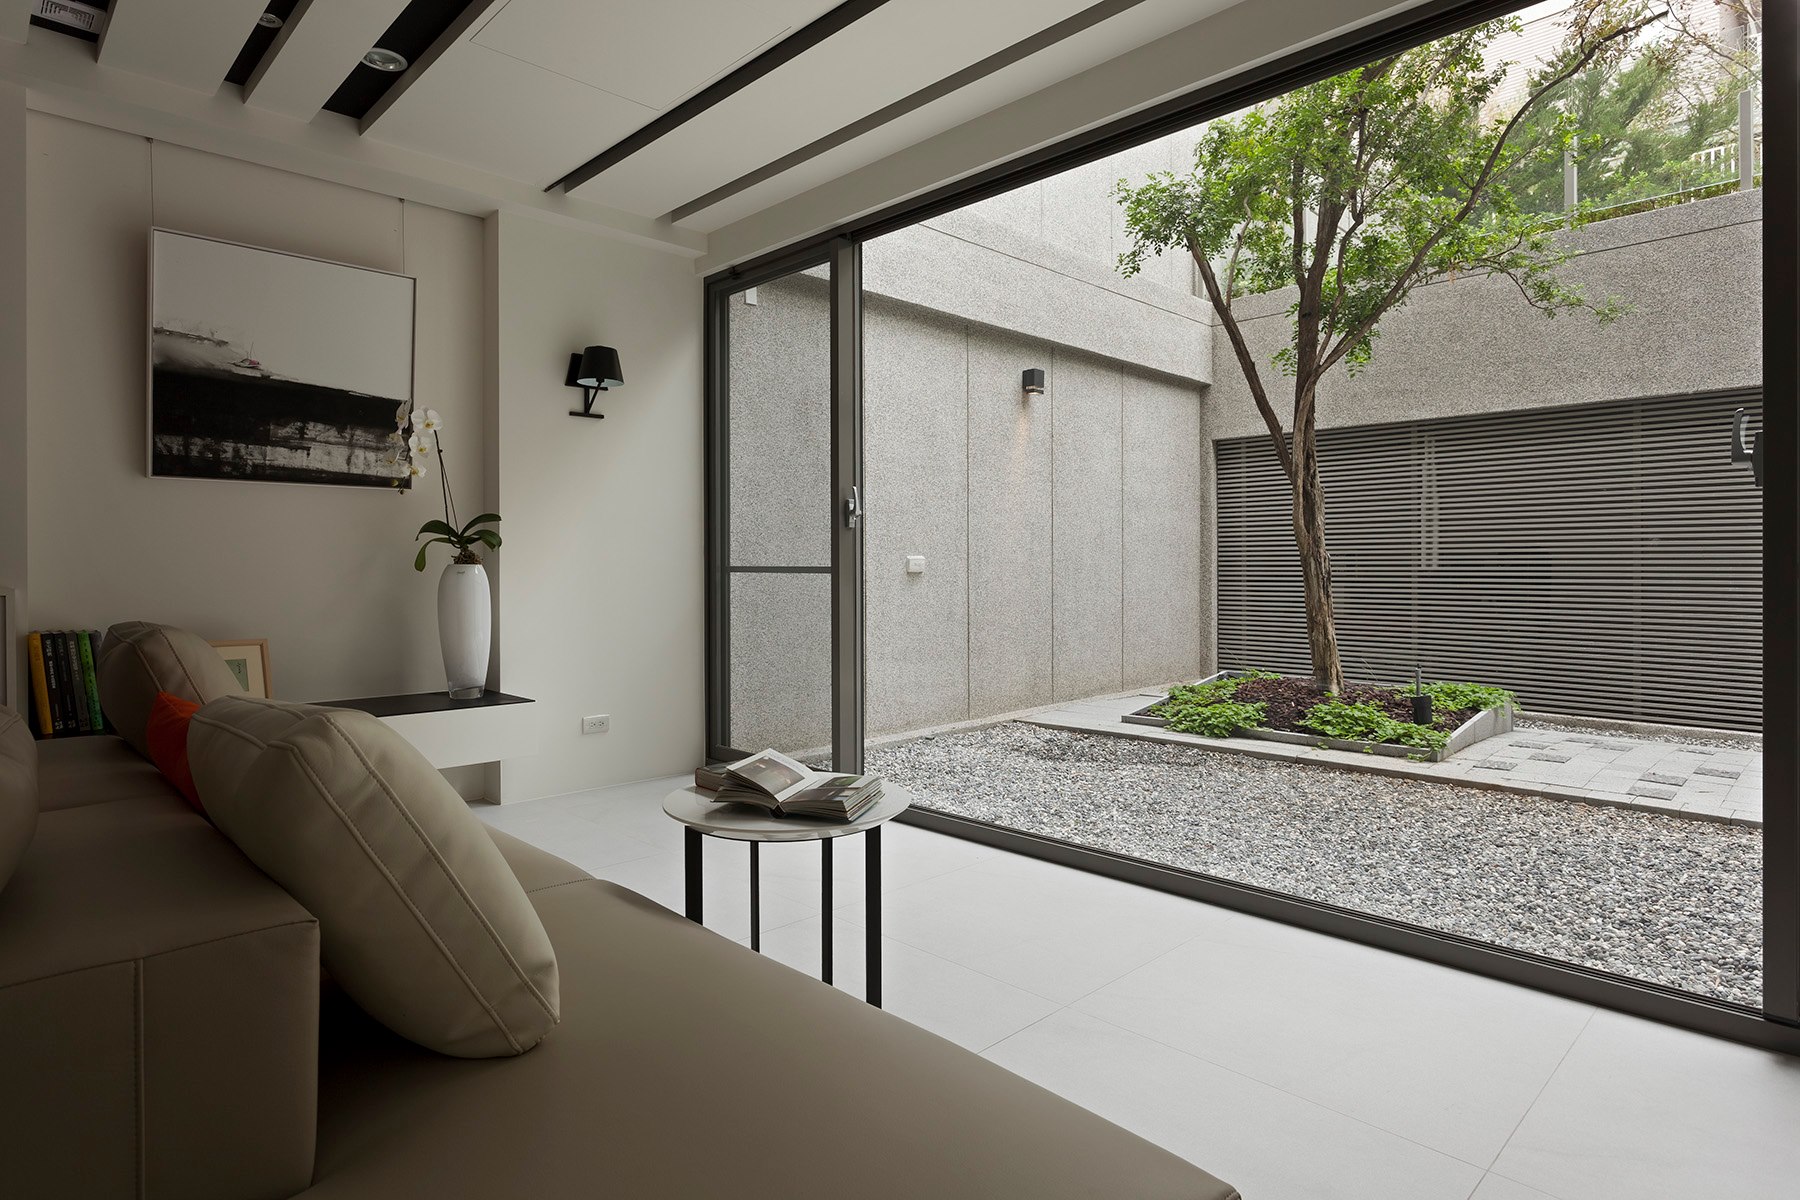 some stunningly beautiful examples of modern asian minimalistic decor